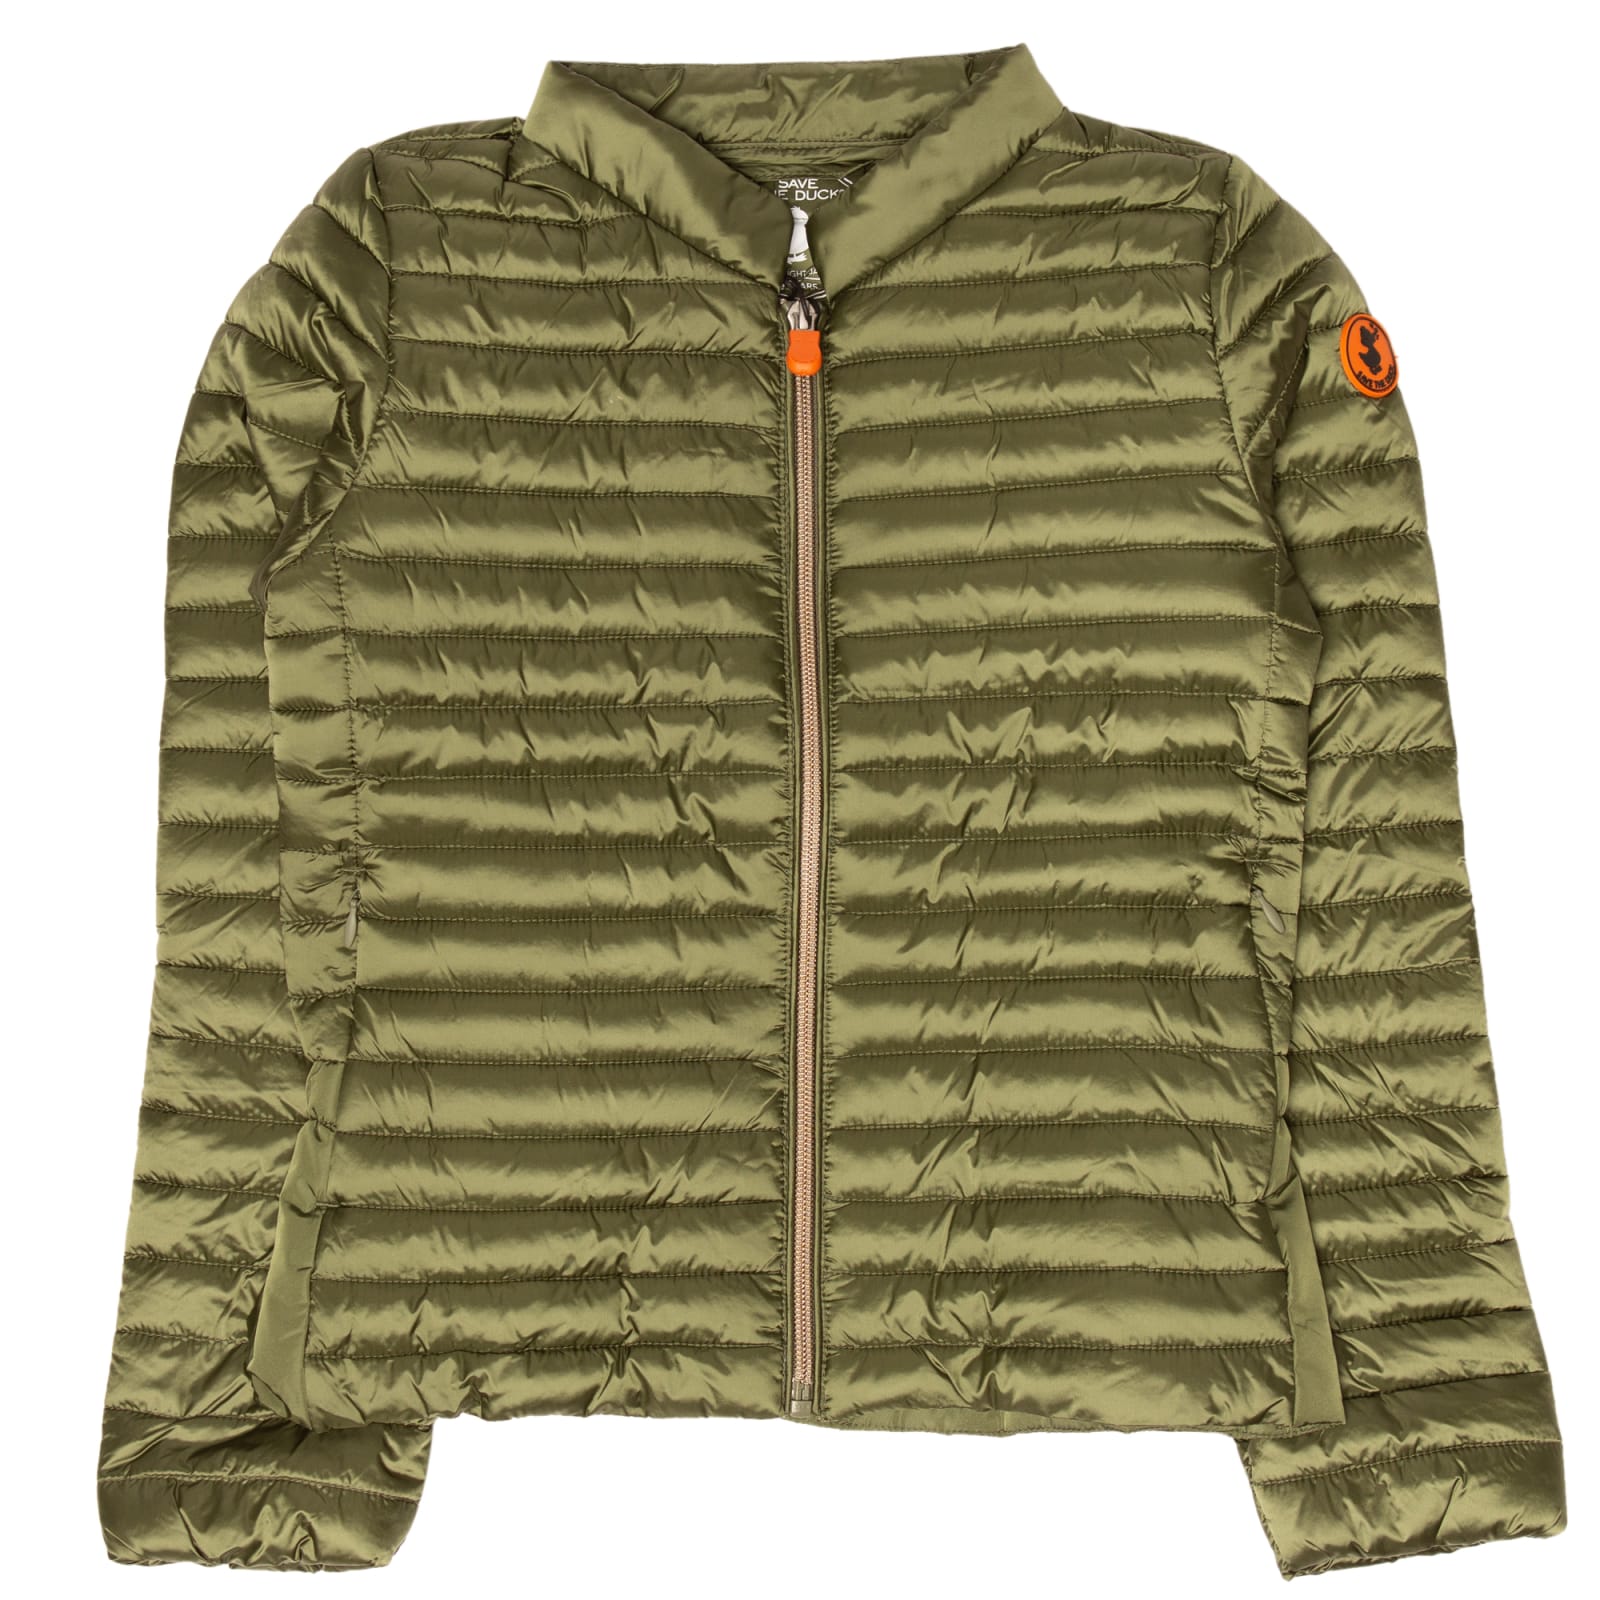 SAVE THE DUCK JACKET,J30084G 50000CACTUS GREEN